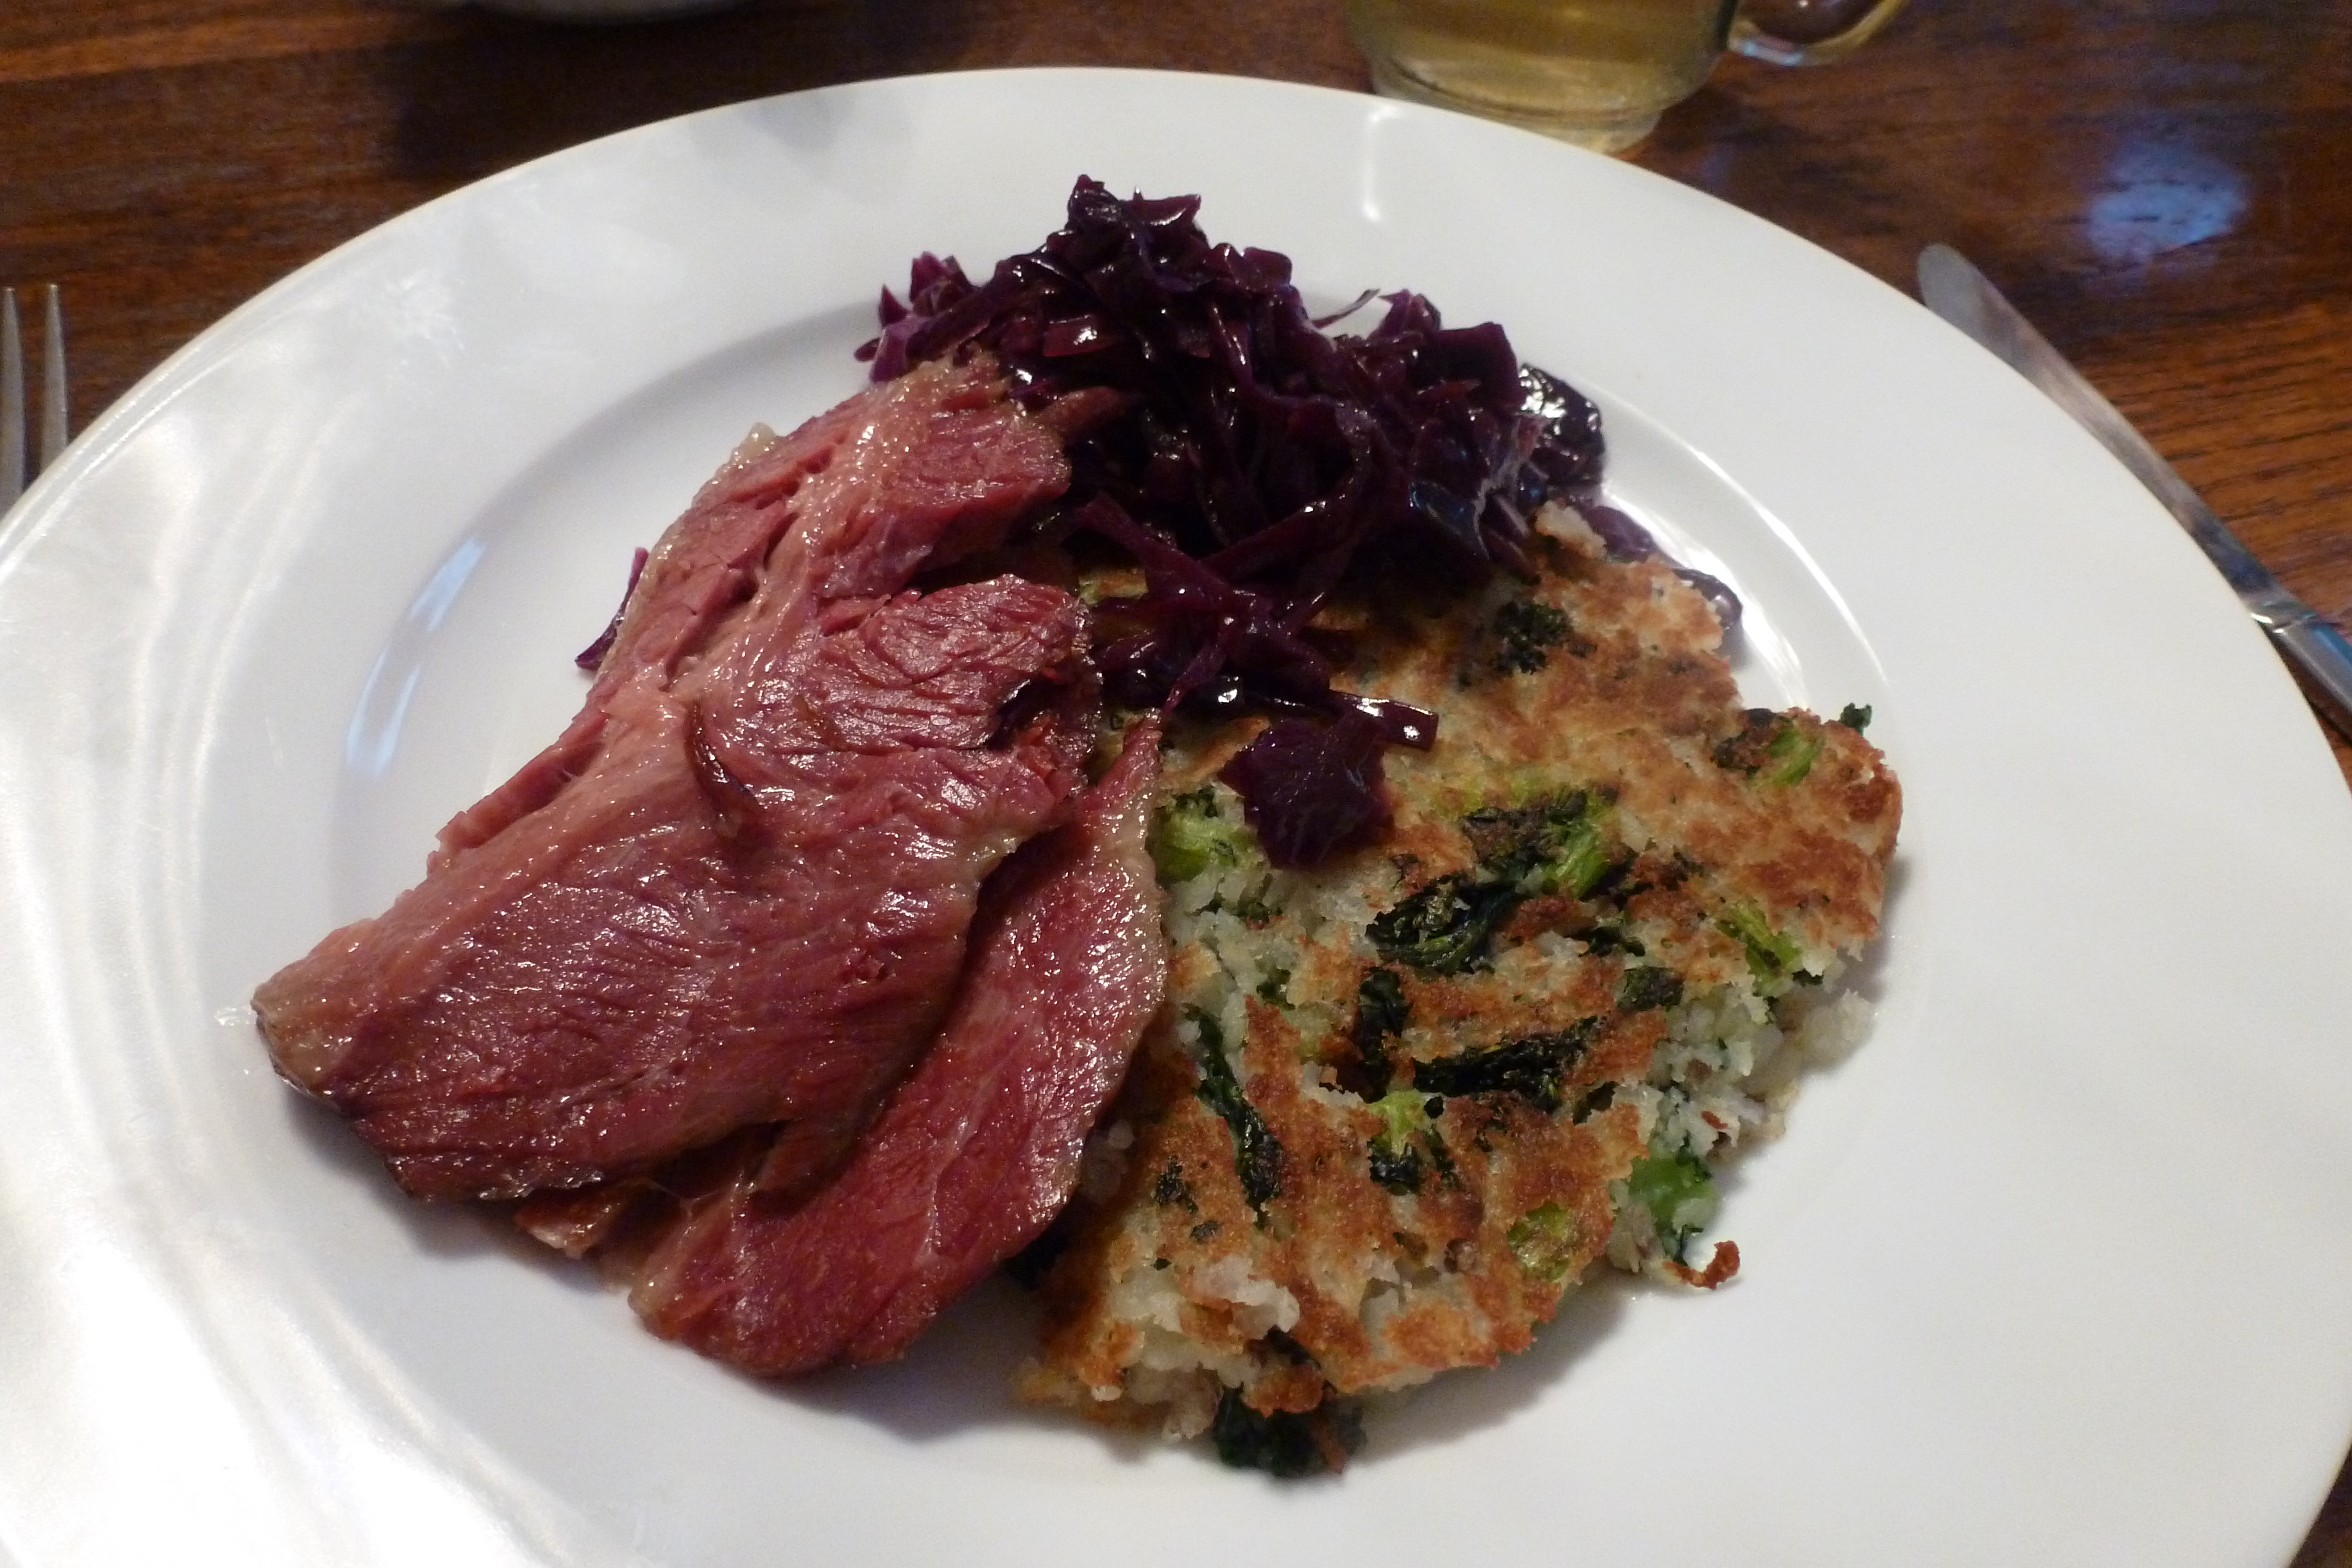 A plate for St. Patrick's Day: corned beef, colcannon, and cabbage